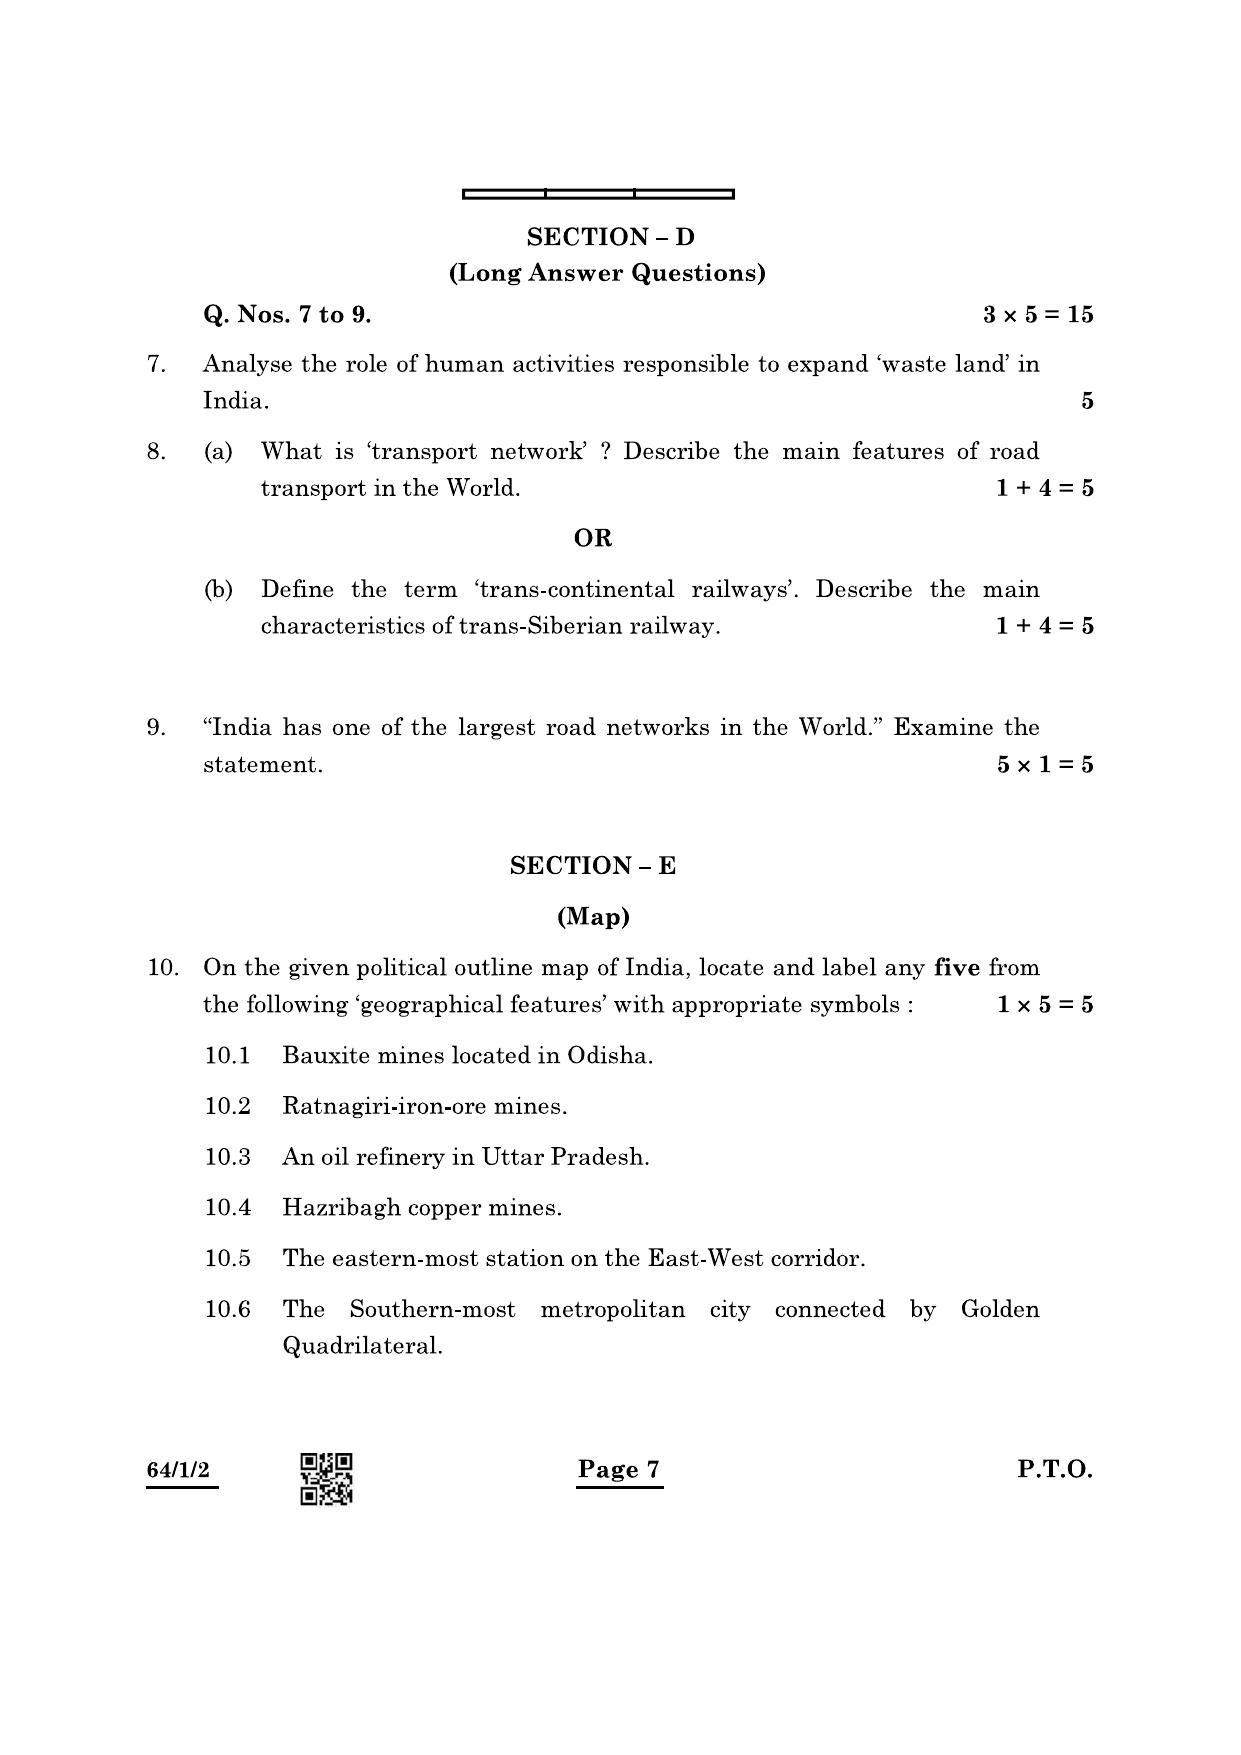 CBSE Class 12 64-1-2 Geography 2022 Question Paper - Page 7